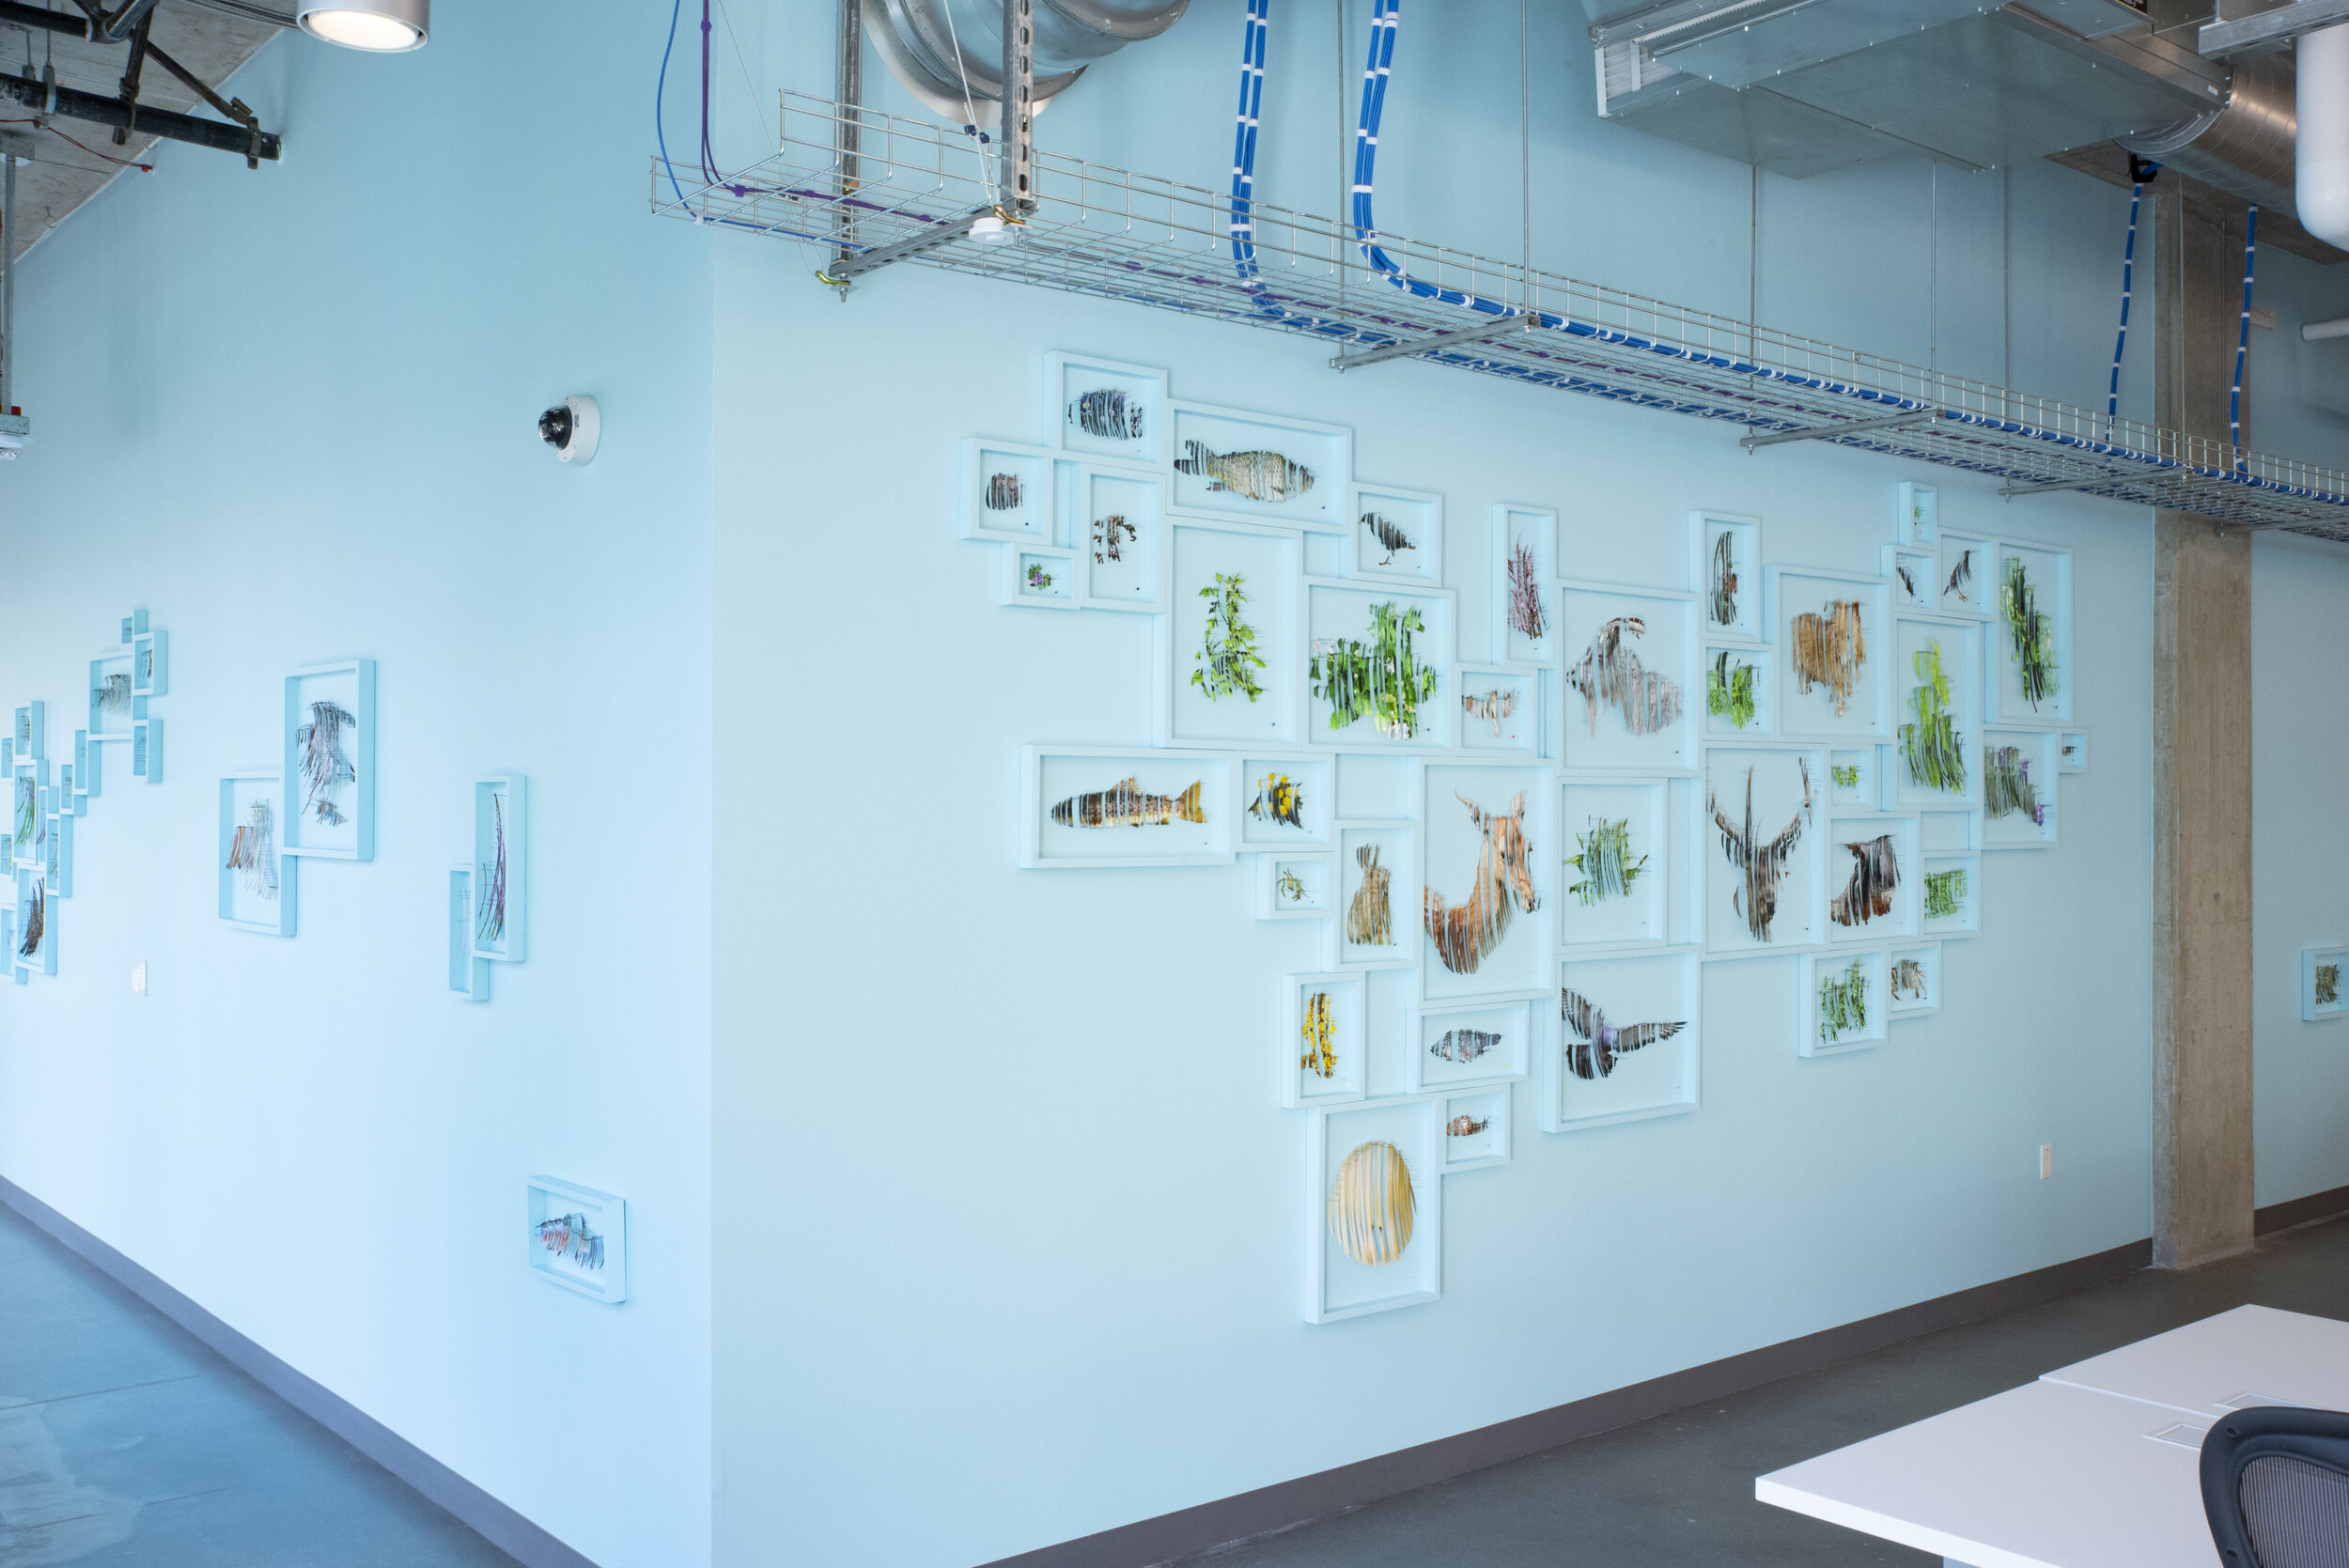  Pangea Revisited  2019  Photos on Paper, Shadowboxes, Insect Pins Dimensions Variable  Permanent installation for Facebook Offices, Seattle, WA. A newly imagined mapping of the global ecosystem. This piece was installed in two iterations: this first